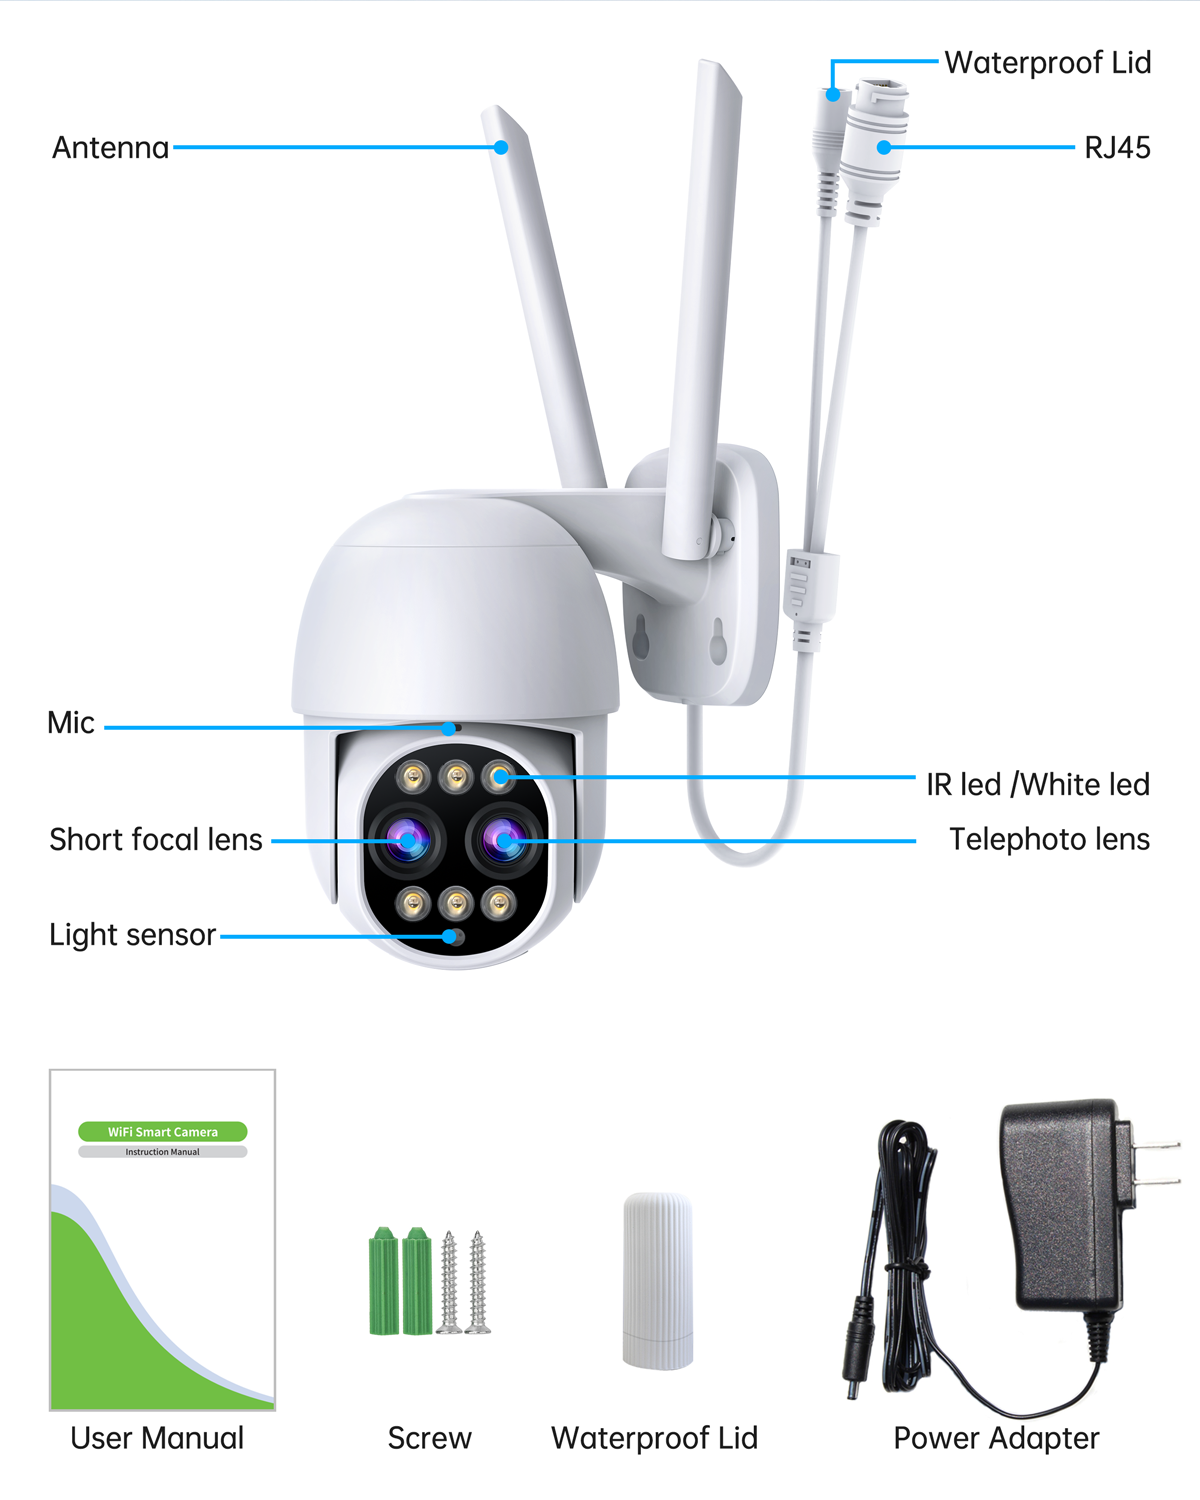 8X Zoom PTZ Wireless IP Camera with Dual Lens 2.8mm to 12mm